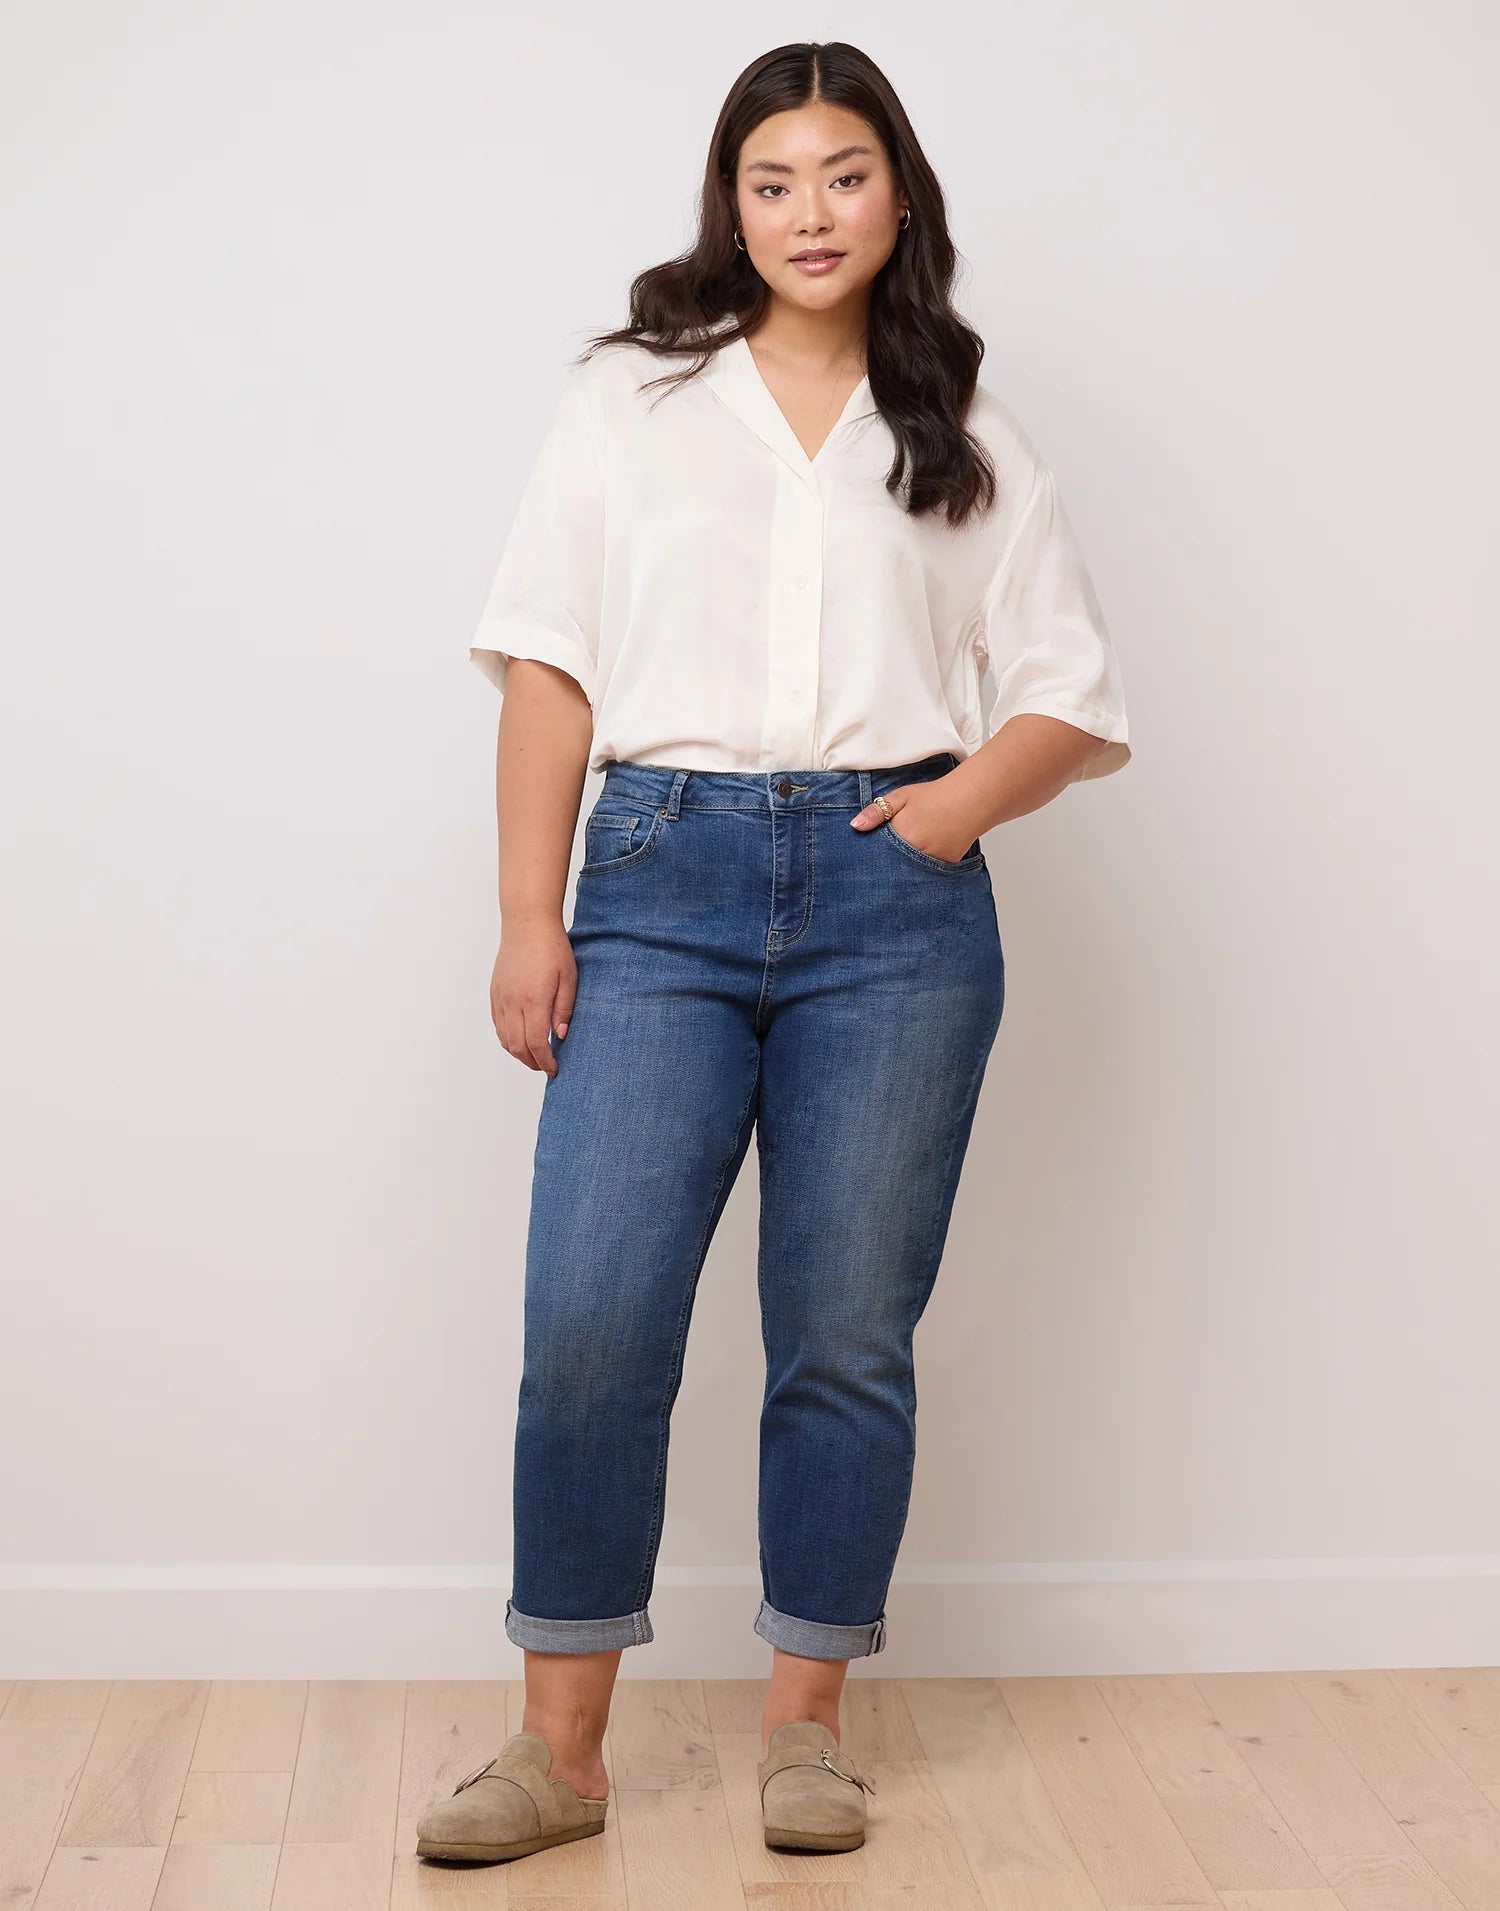 Jeans plus size outfits Archives